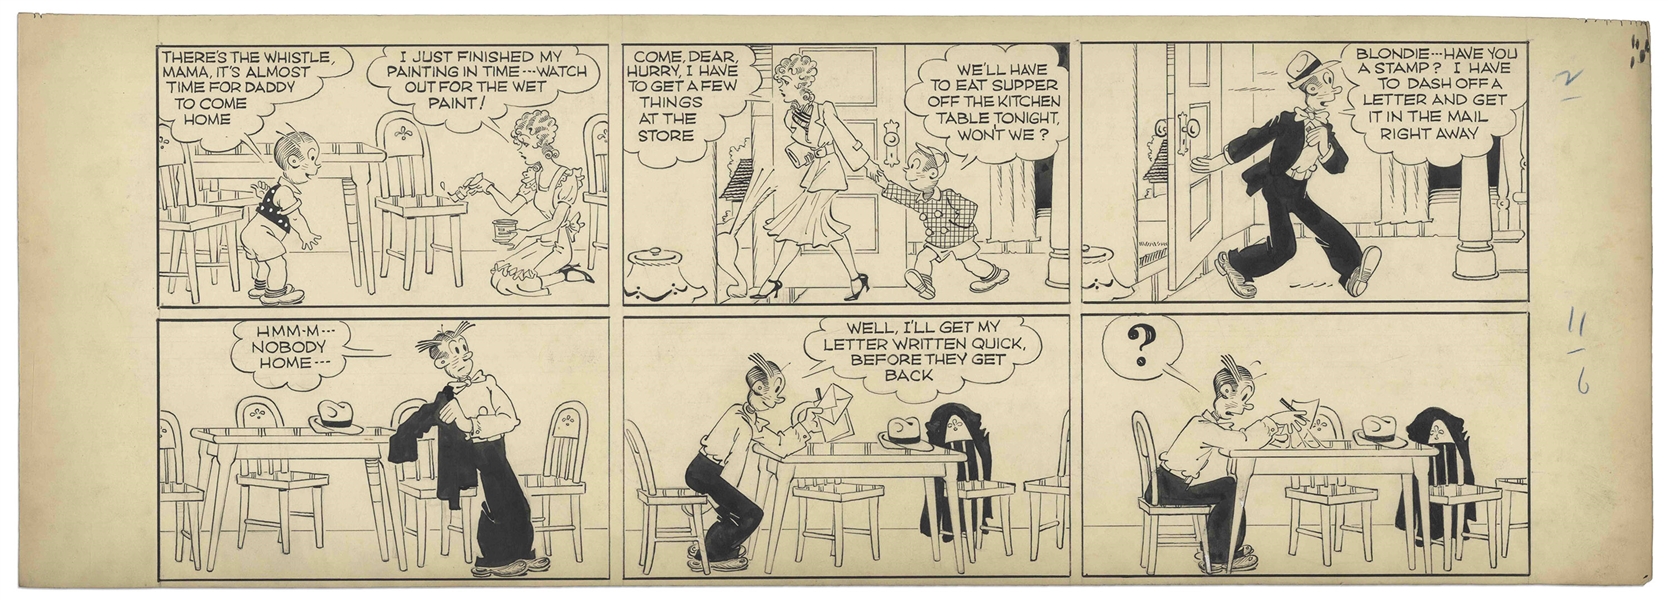 Chic Young Hand-Drawn ''Blondie'' Sunday Comic Strip From 1938 -- Dagwood's Just as Fast Getting Out of His Clothes as He Is Getting Into Them